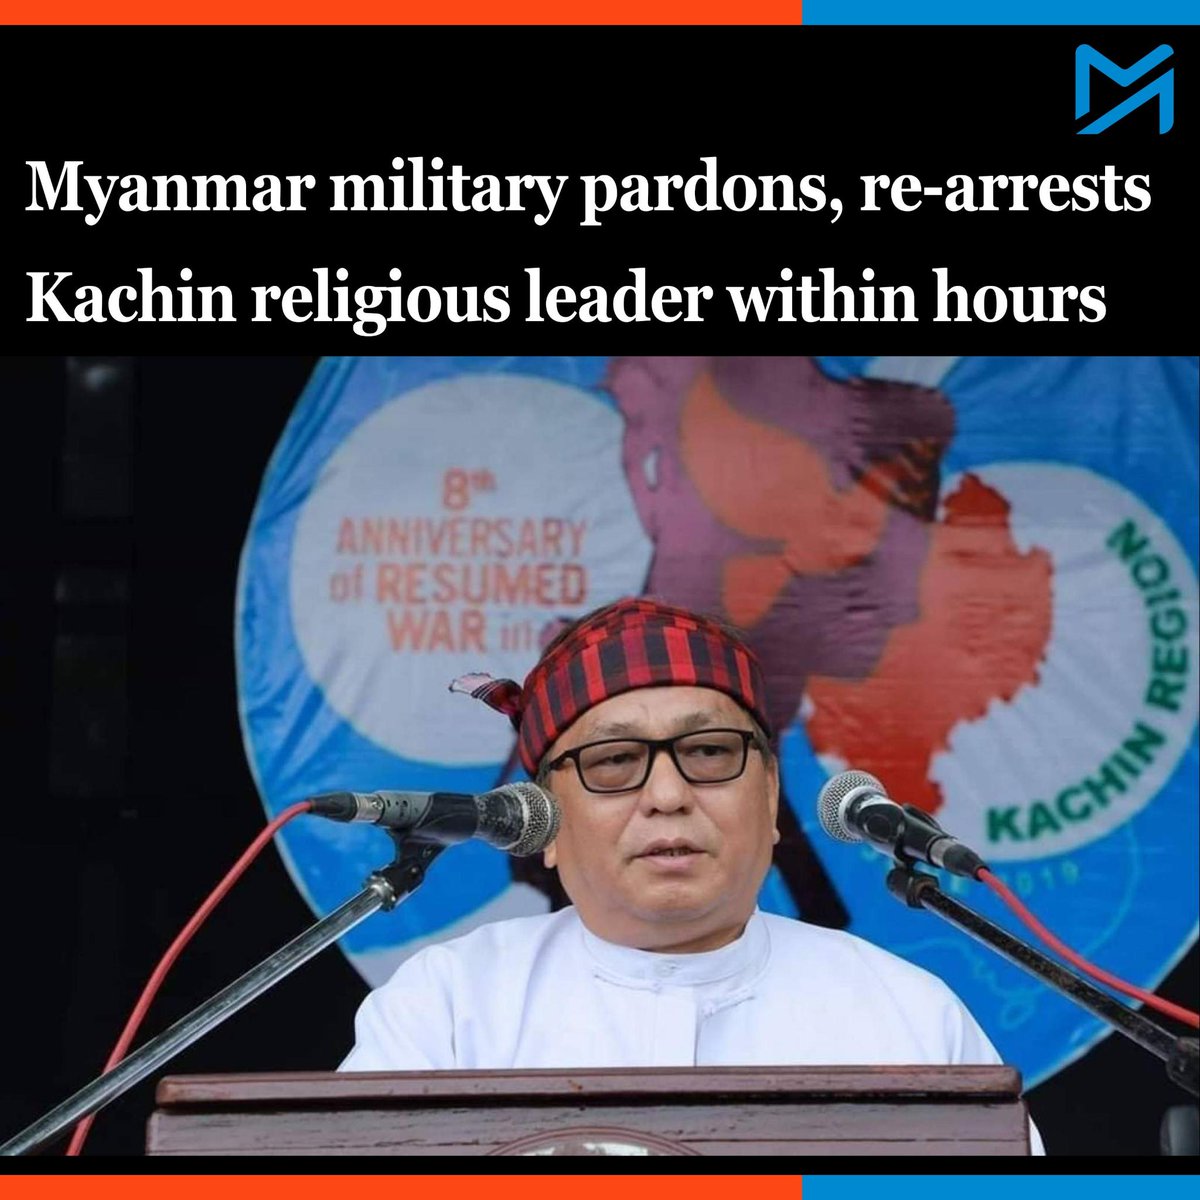 Dr Hkalam Samson is released from prison in a mass amnesty before being taken from his home again by junta soldiers for interrogation later that night Read More : myanmar-now.org/en/news/myanma… #Myanmar #Kachin